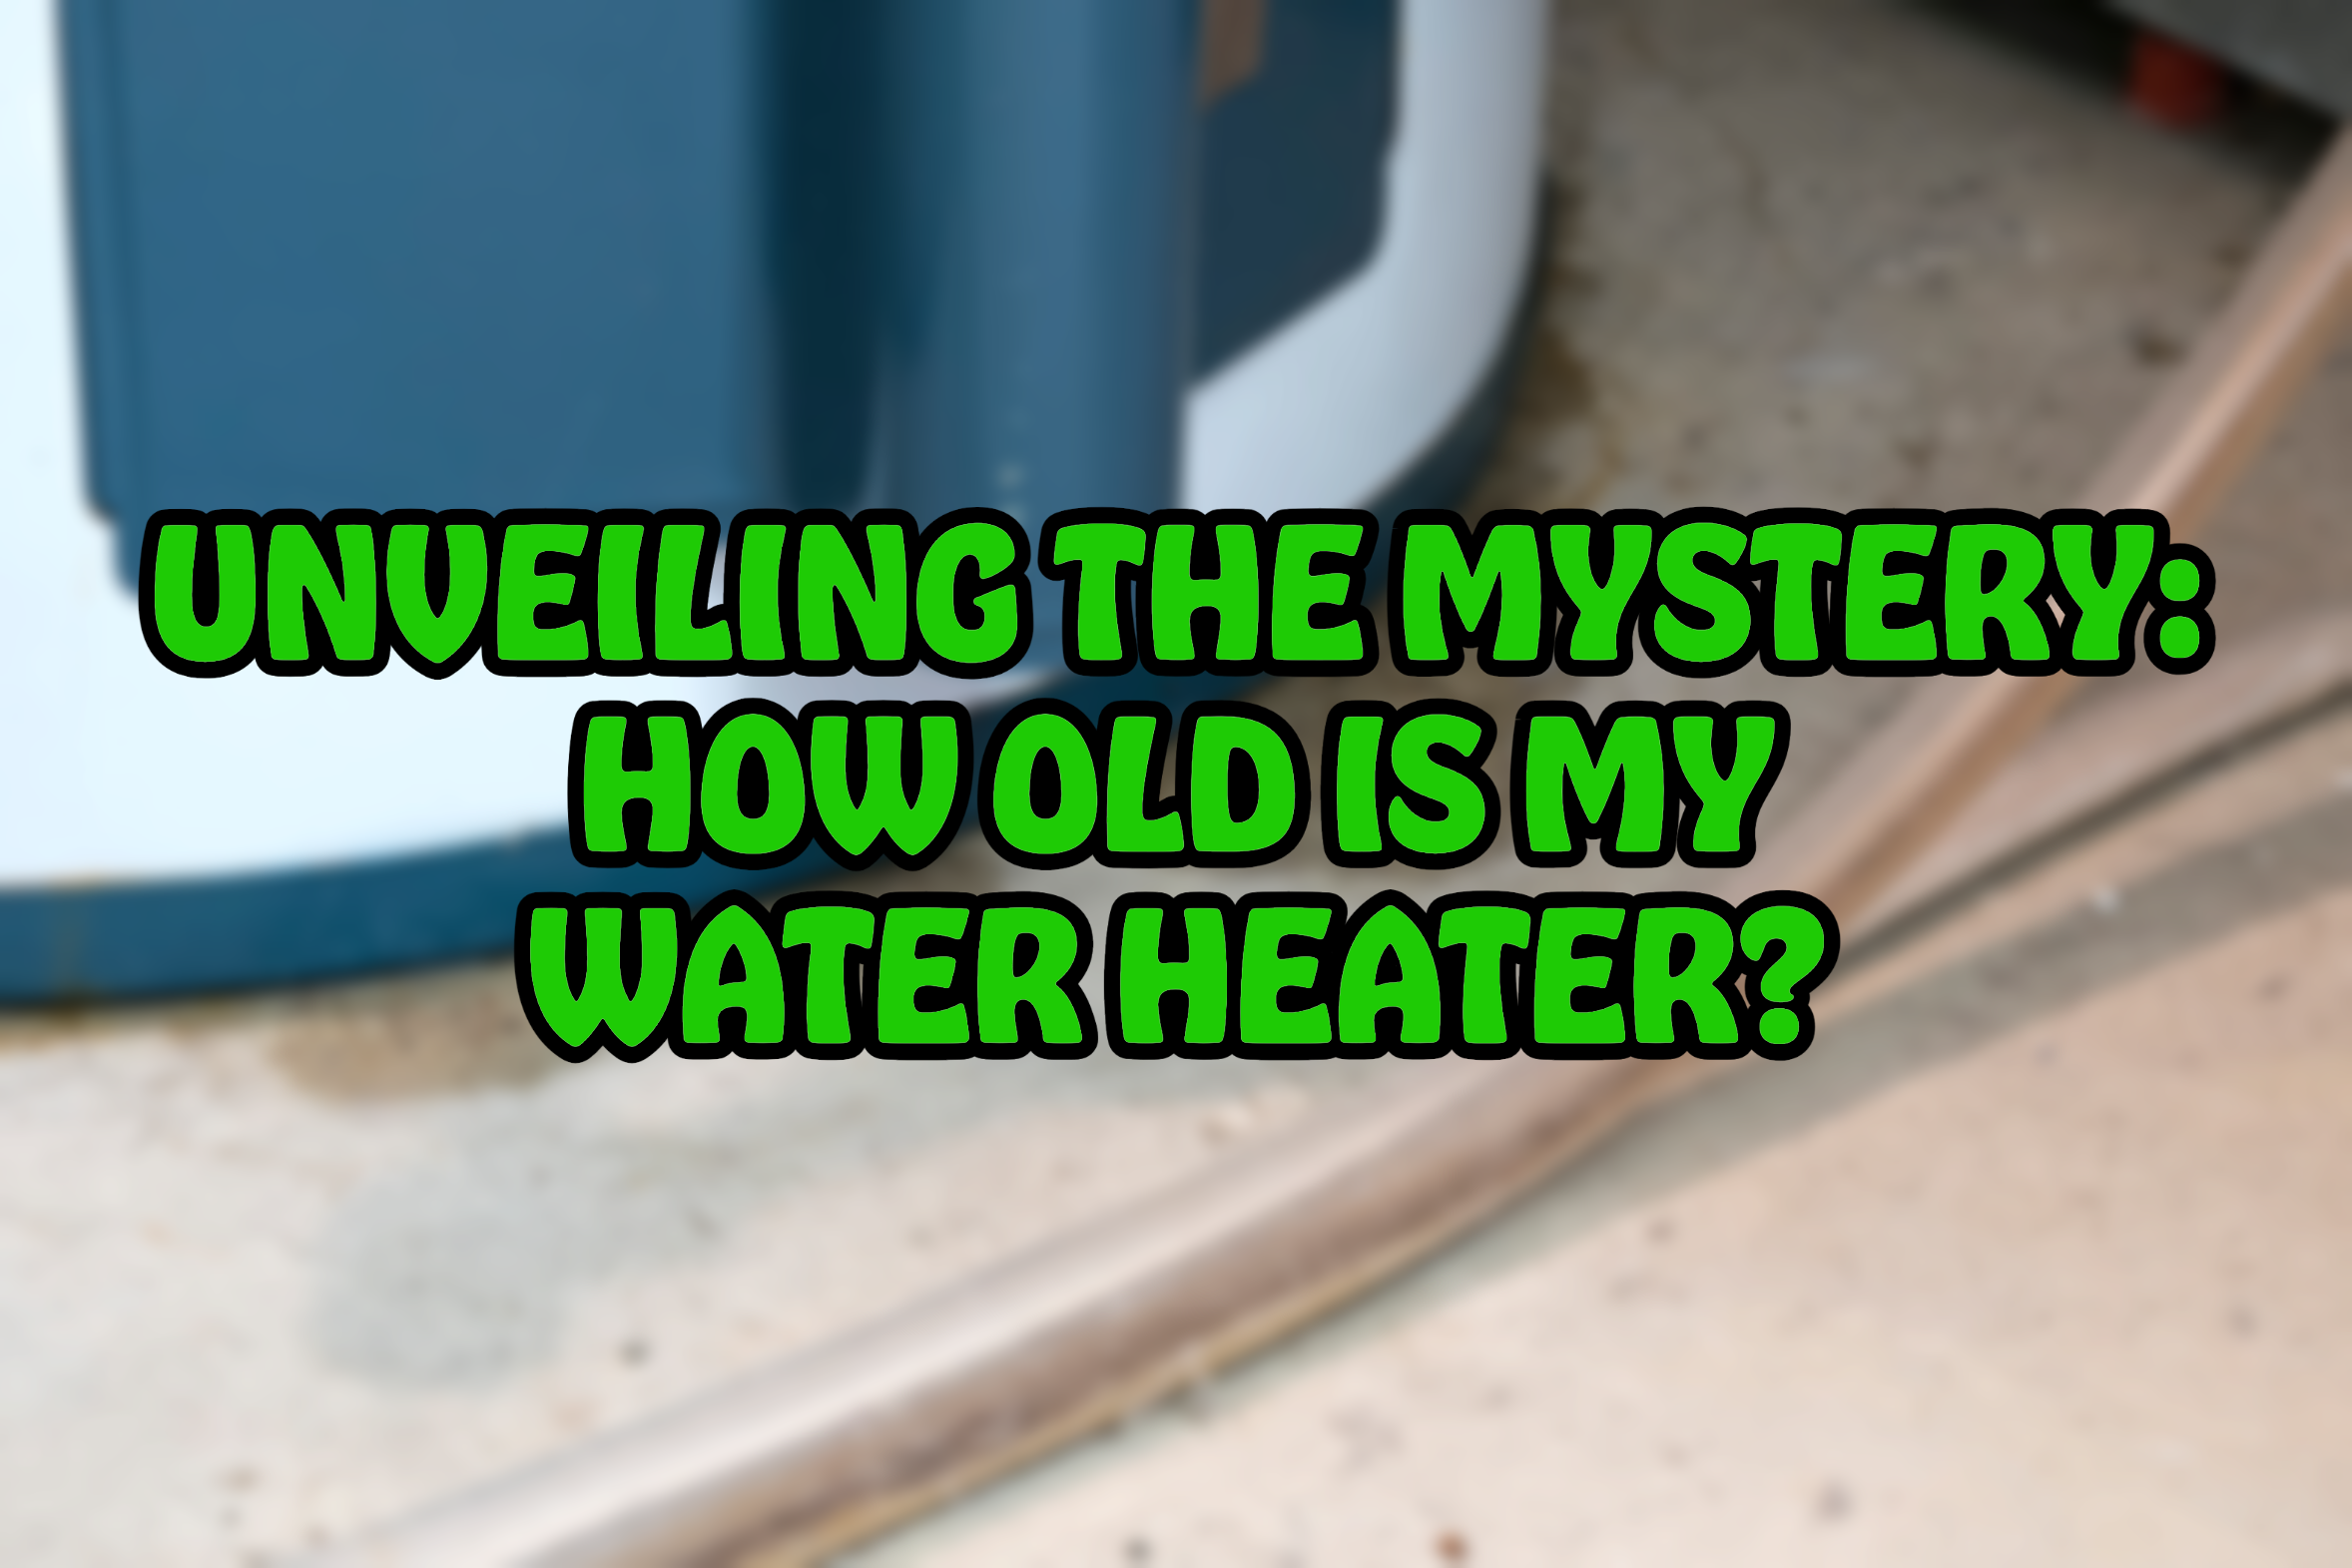 UNVEILING THE MYSTERY: HOW OLD IS MY WATER HEATER?